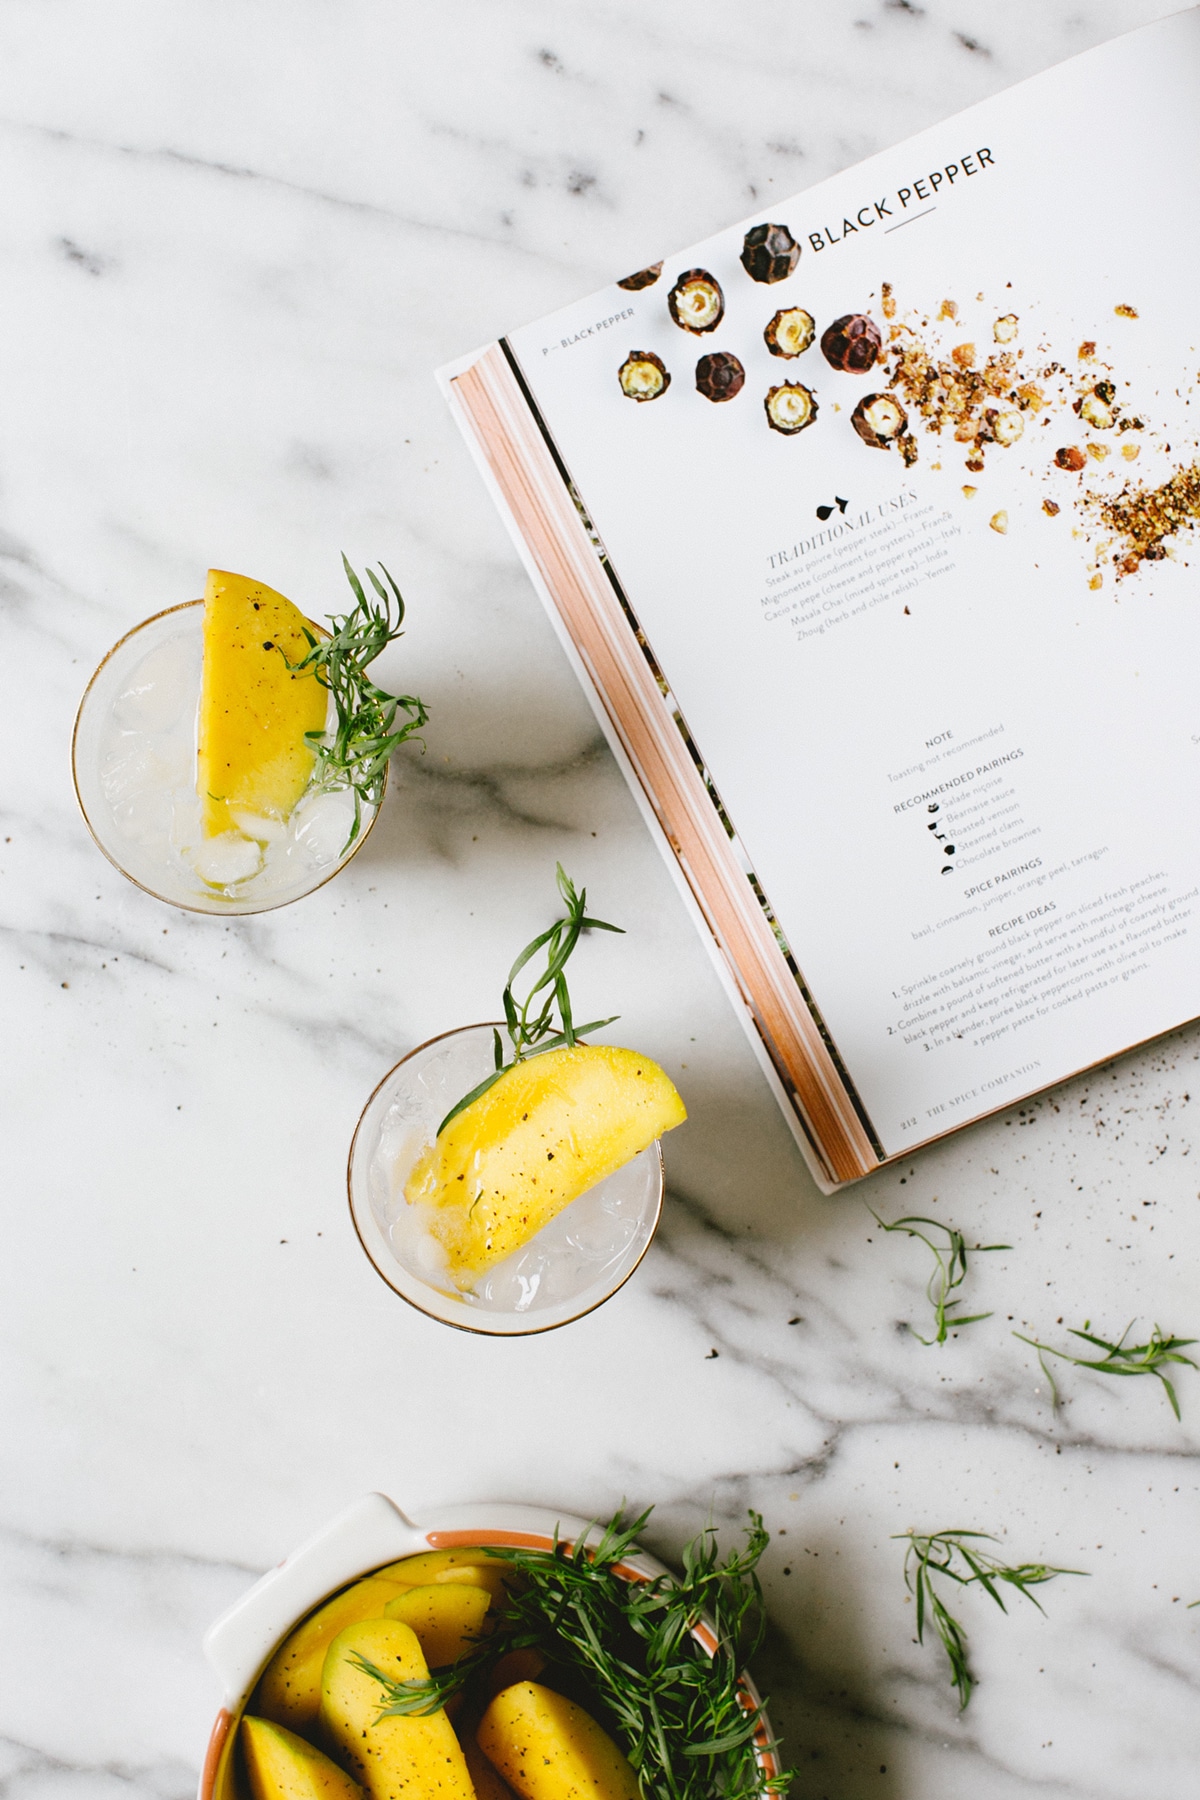 we've been doing this classic cocktail all wrong. find out why a mango gin & tonic (with pepper!) is the way to go! | recipe on coco kelley